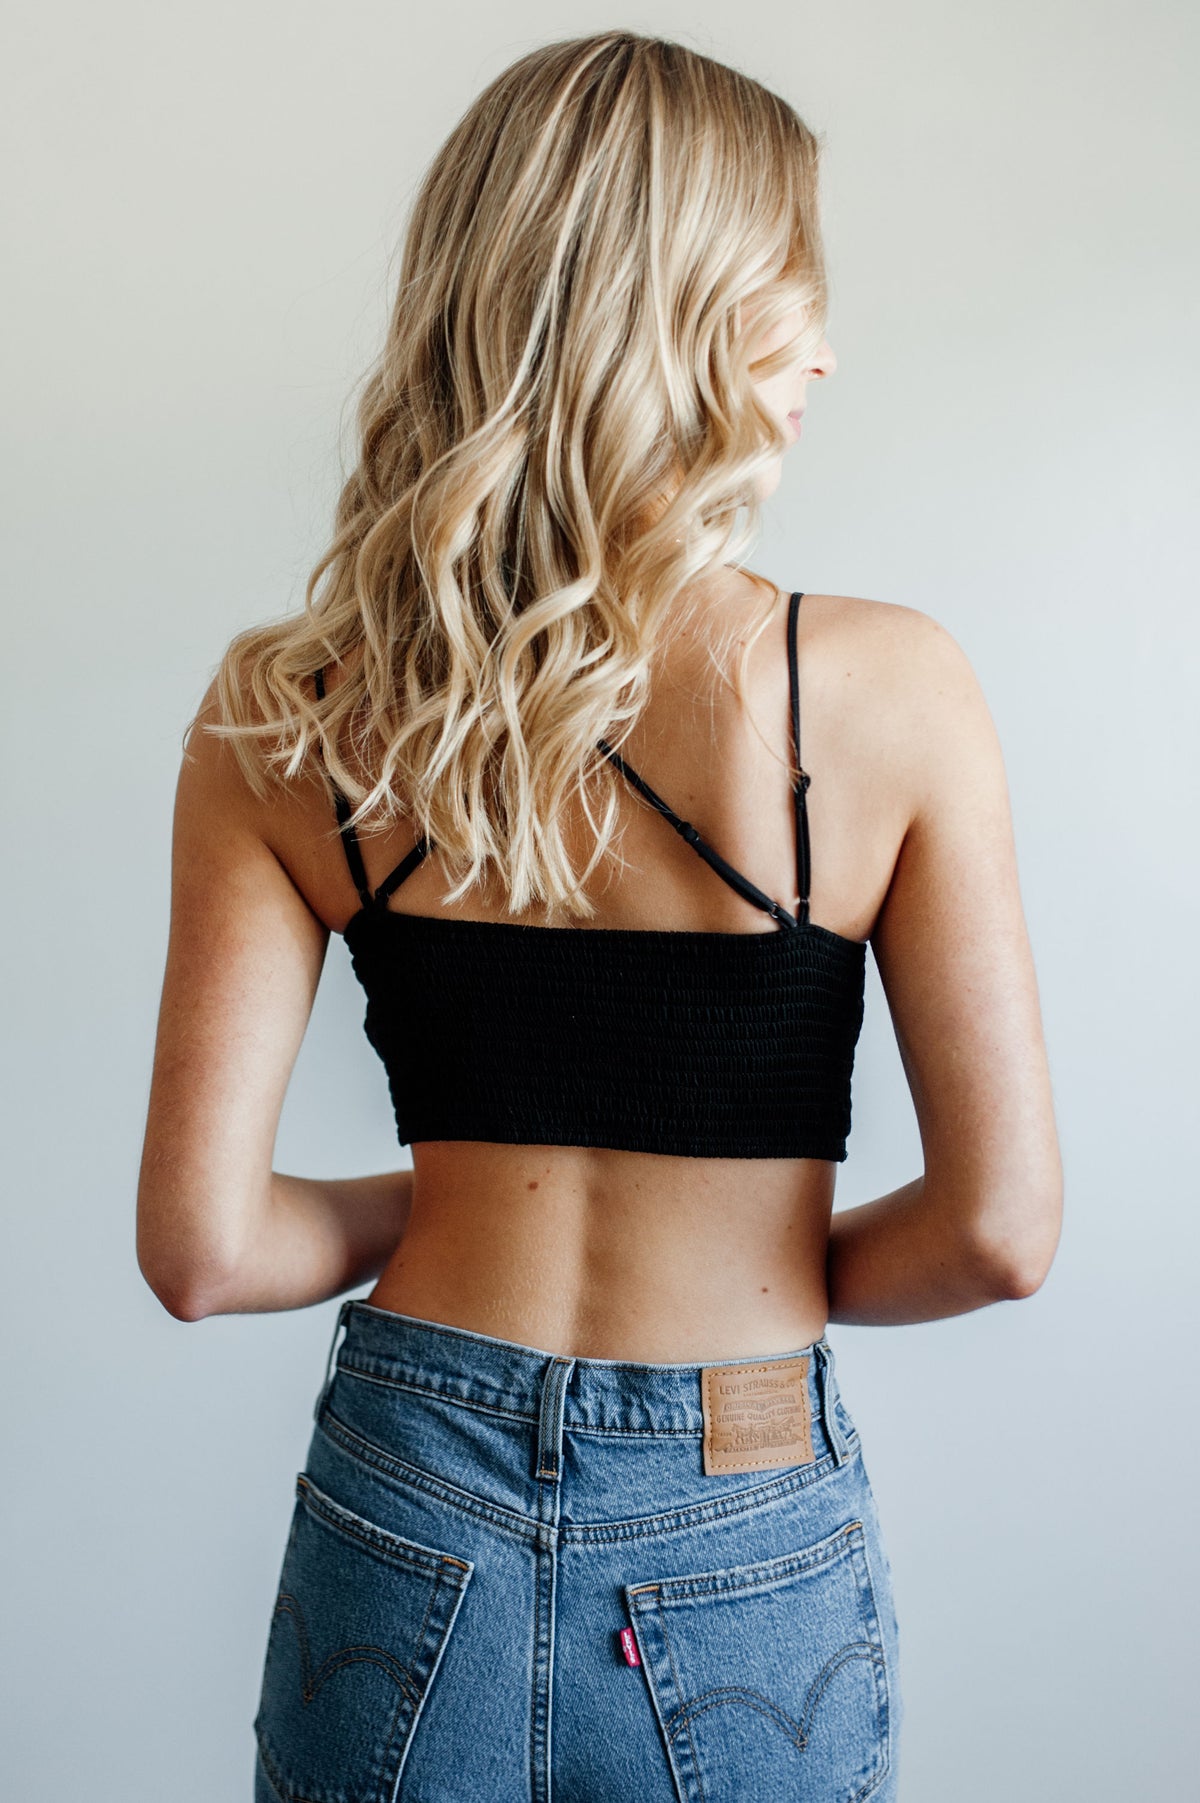 Pictured is a black, lace bralette garment with strappy criss-cross shoulder straps, ruched backing, padded cups, and cropped style.